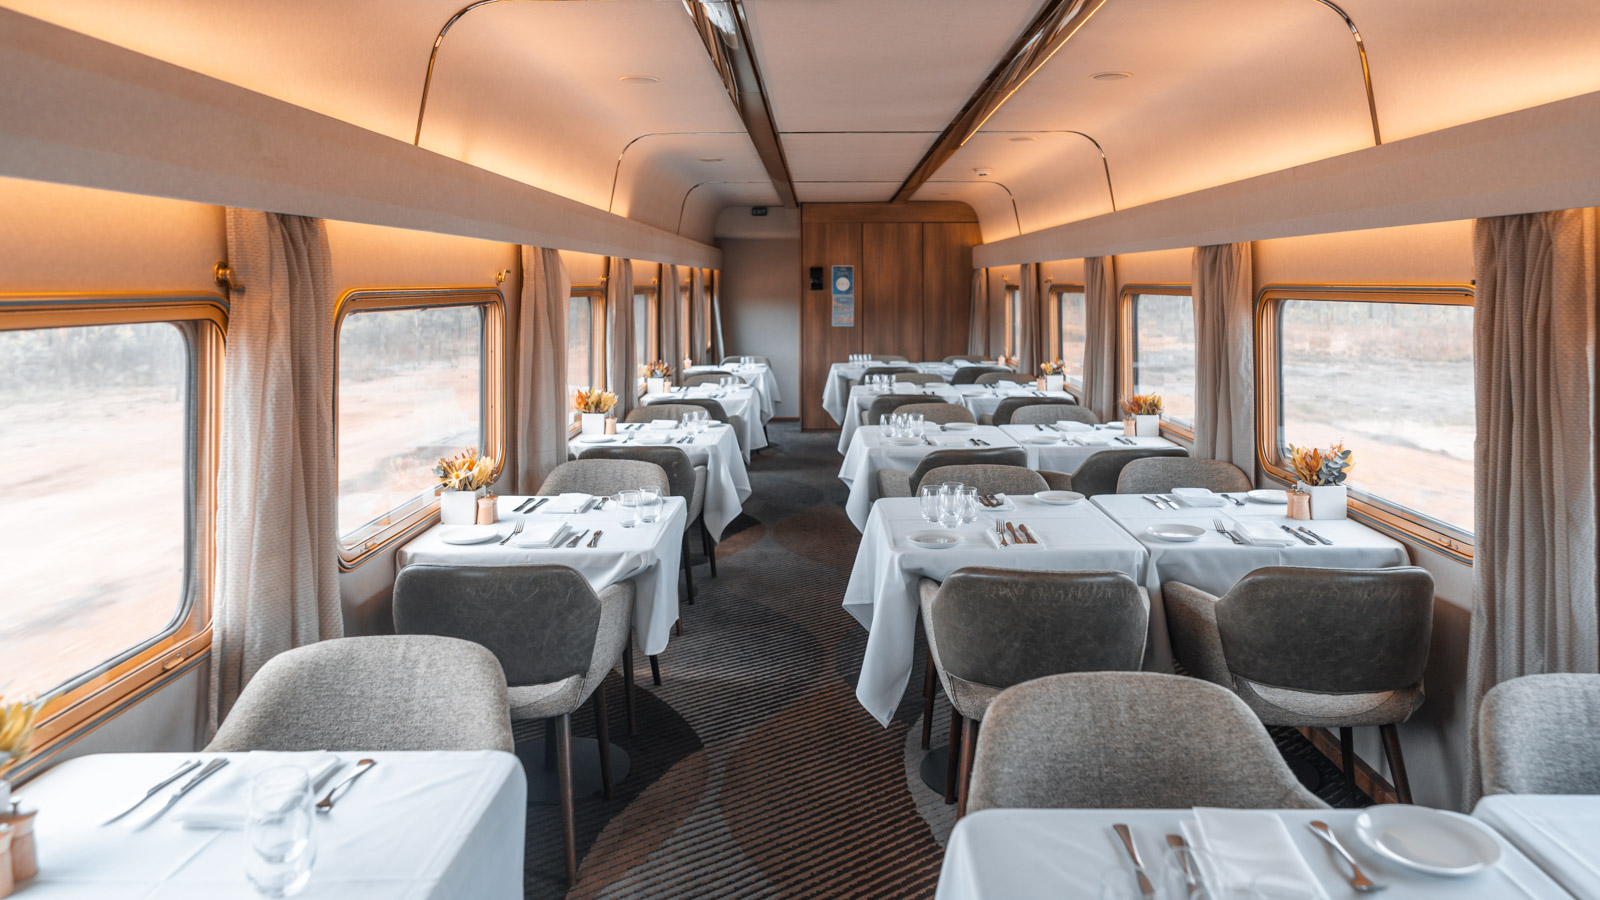 The Ghan restaurant with a view